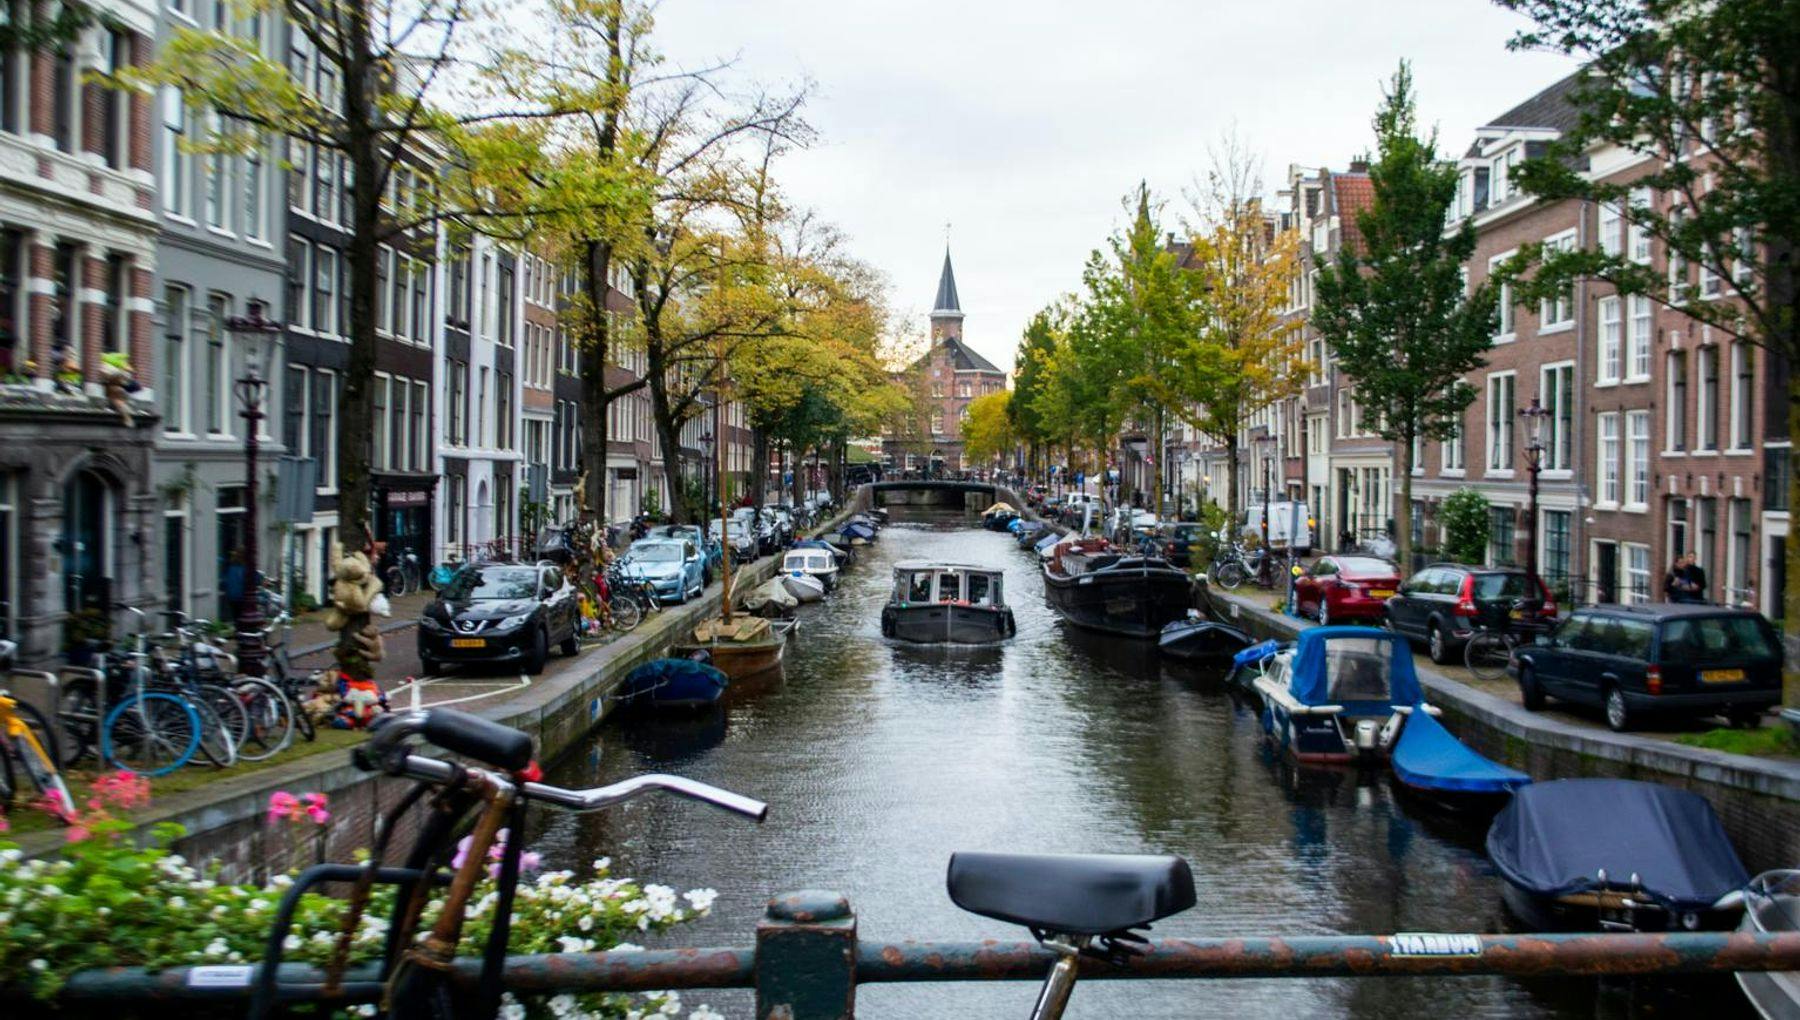 View of the Bloemgracht Canal